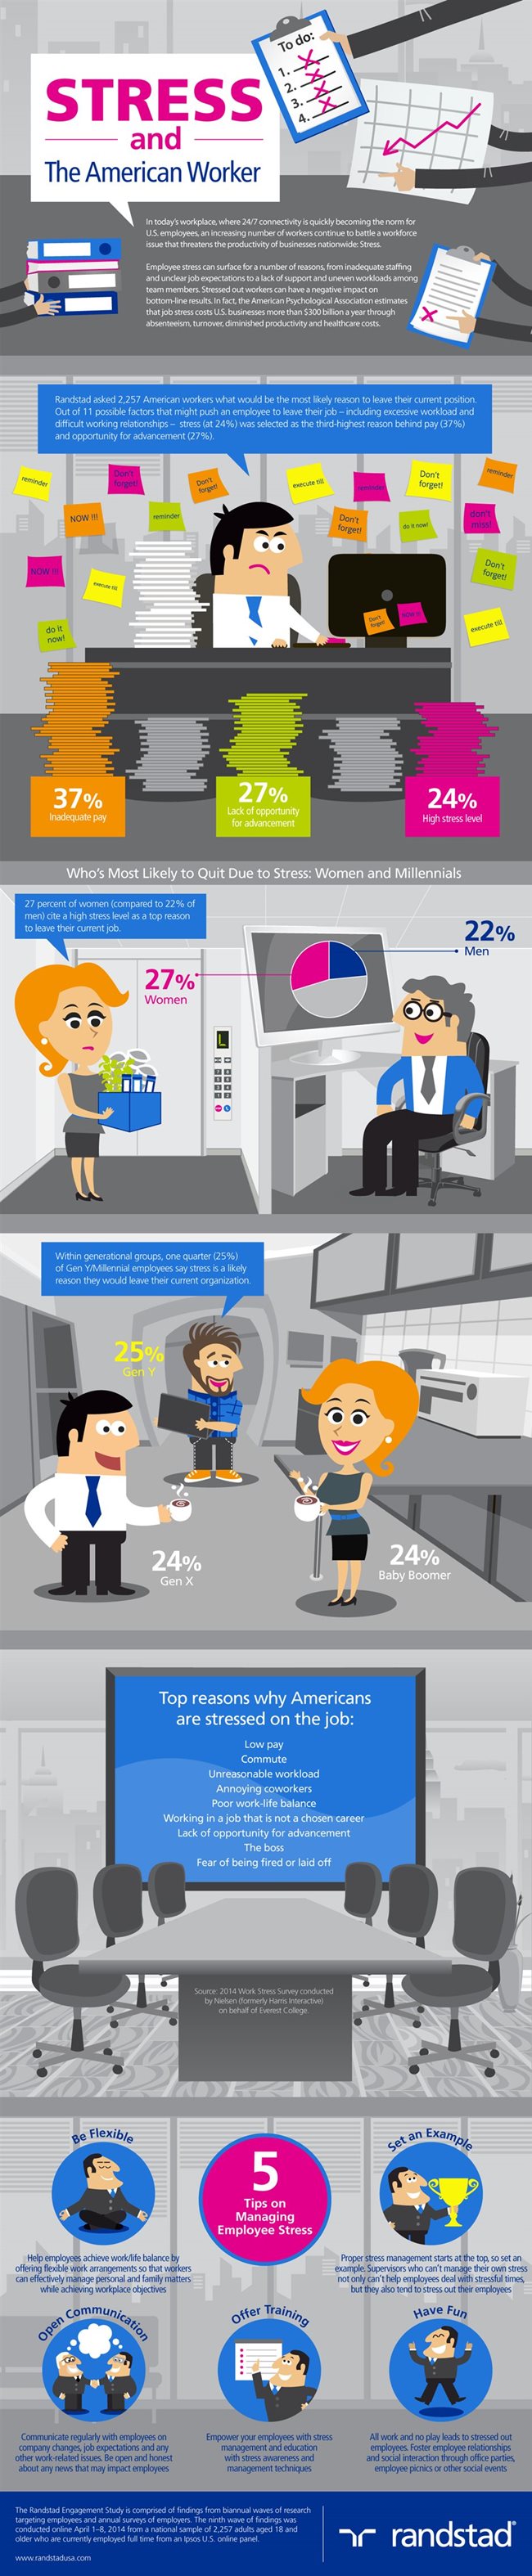 Infographic - 9 ways to Eliminate Employee Stress Points